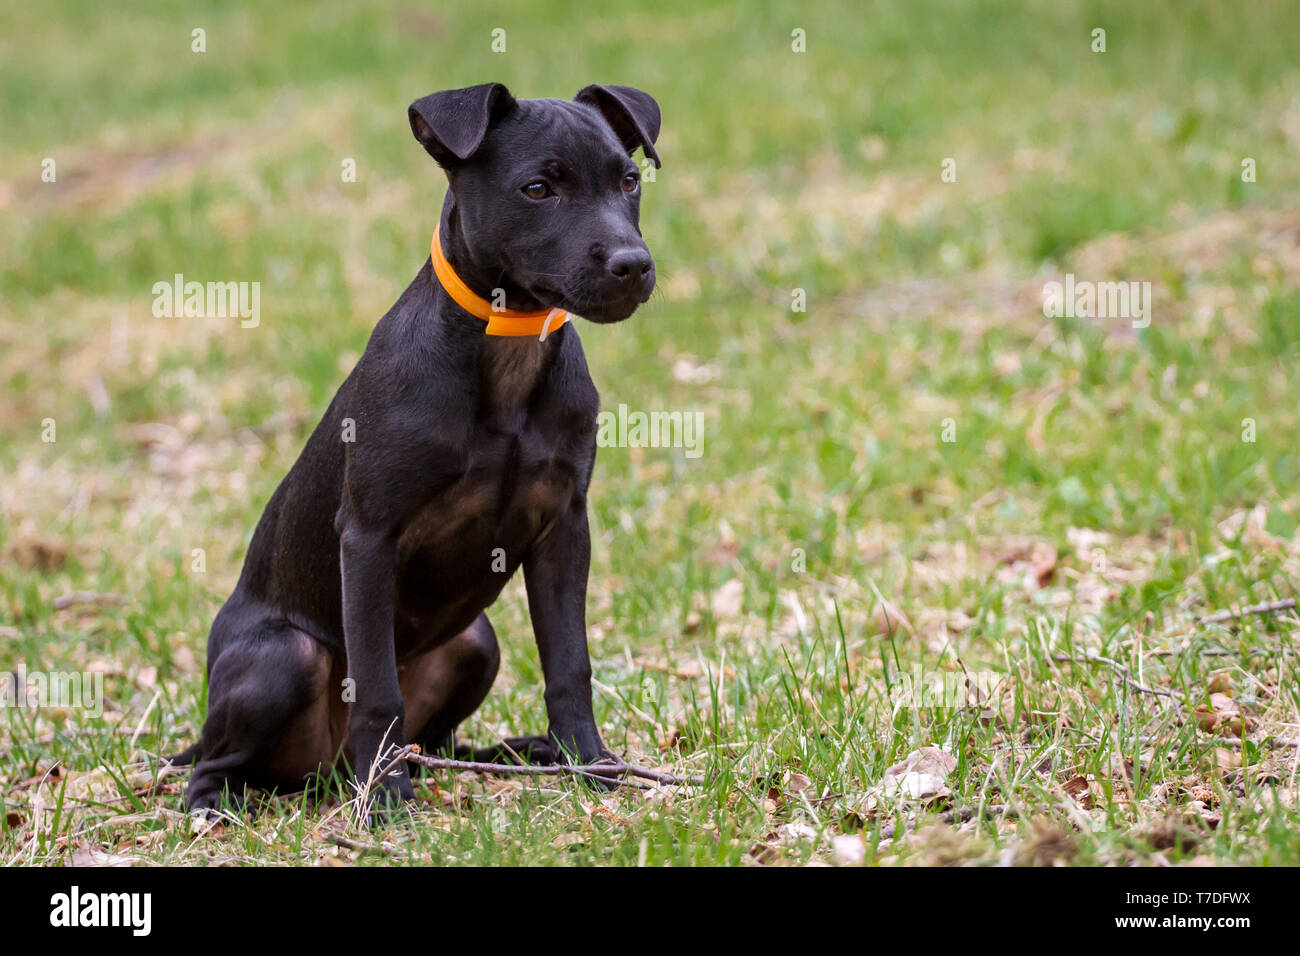 Patterdale Terrier High Resolution Stock Photography and Images - Alamy